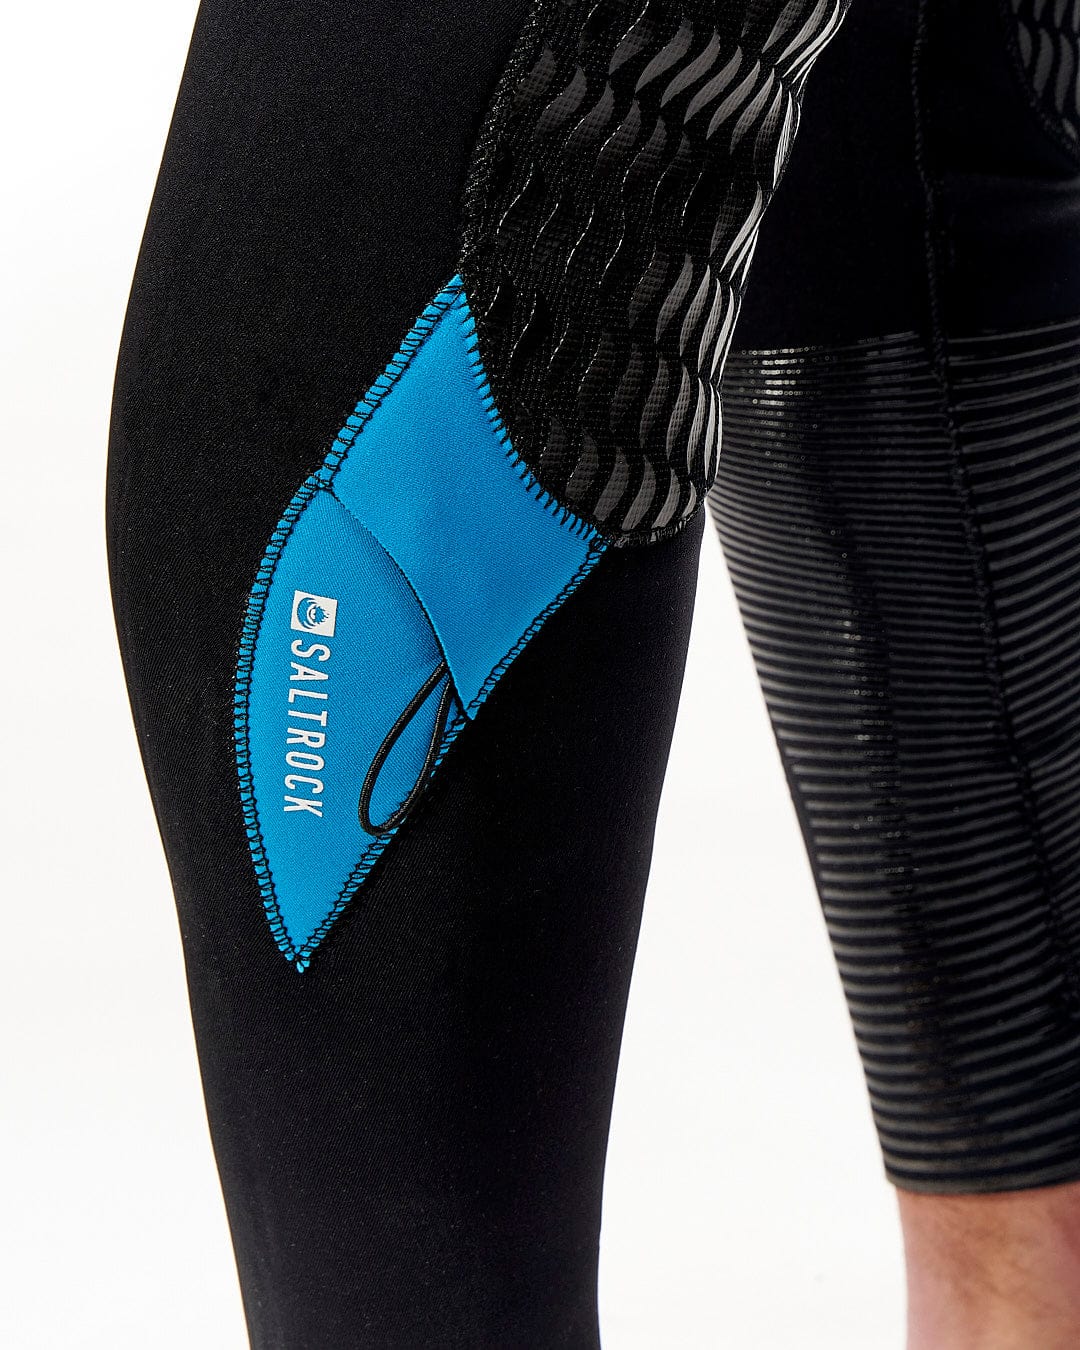 The leg of a man wearing a Saltrock Synthesis - Mens 4/3 Back Zip Full Wetsuit - Black.